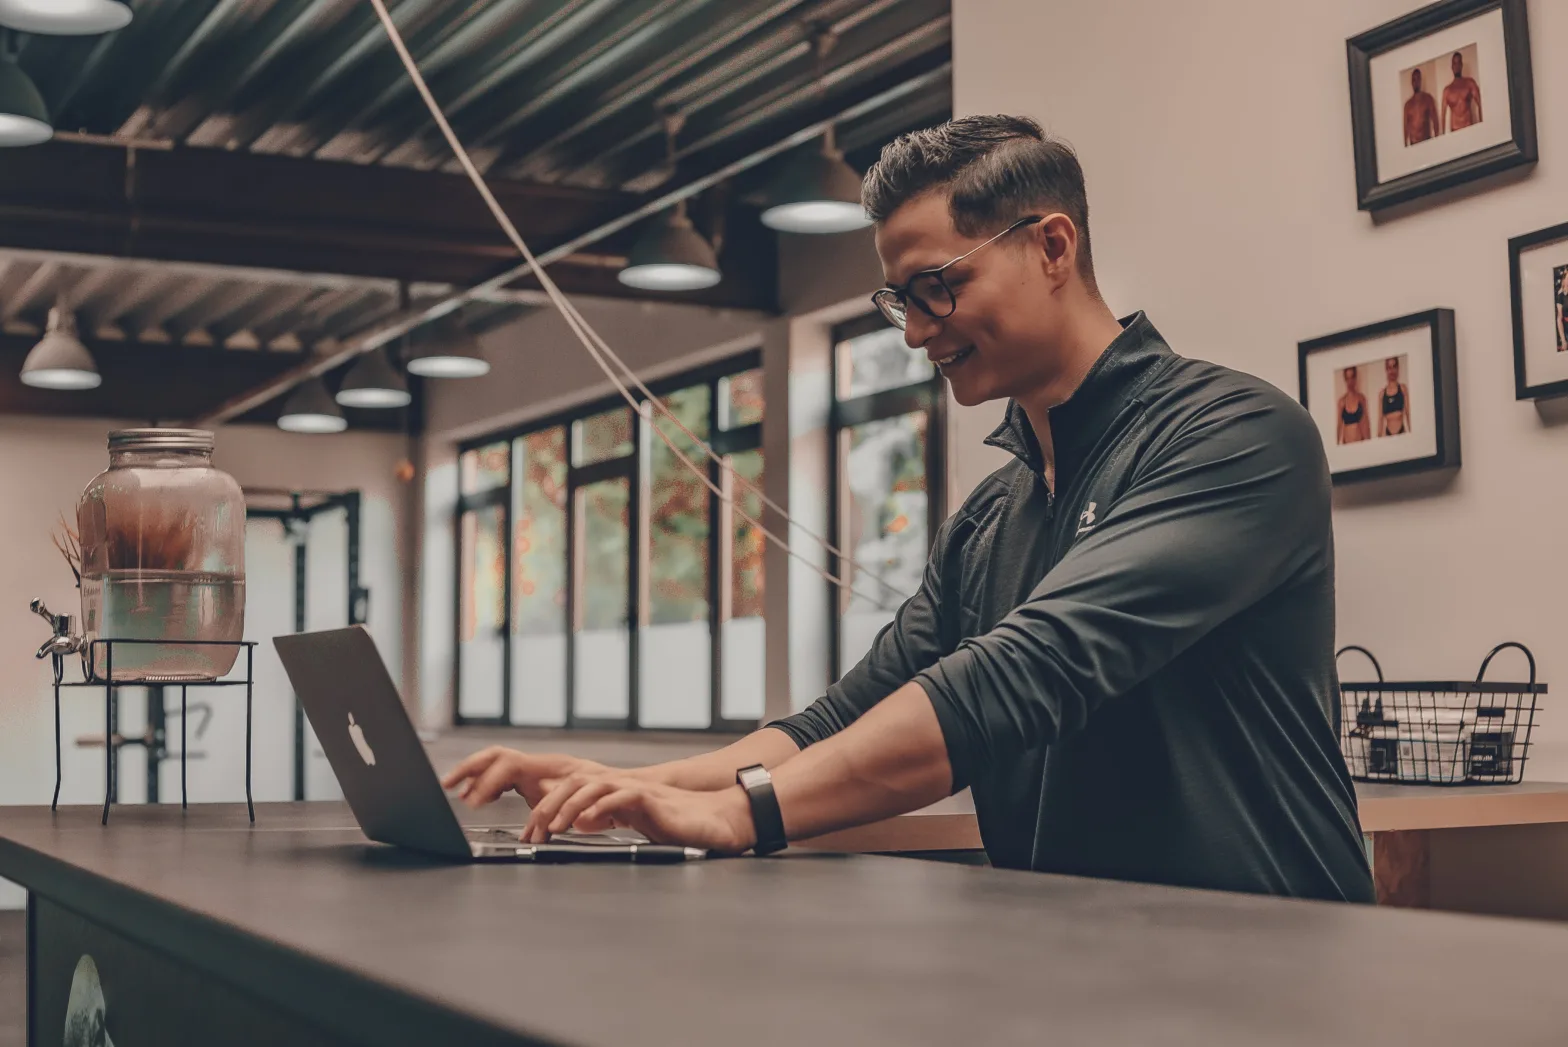 Smiling man standing at a counter working on his laptop in a gym.